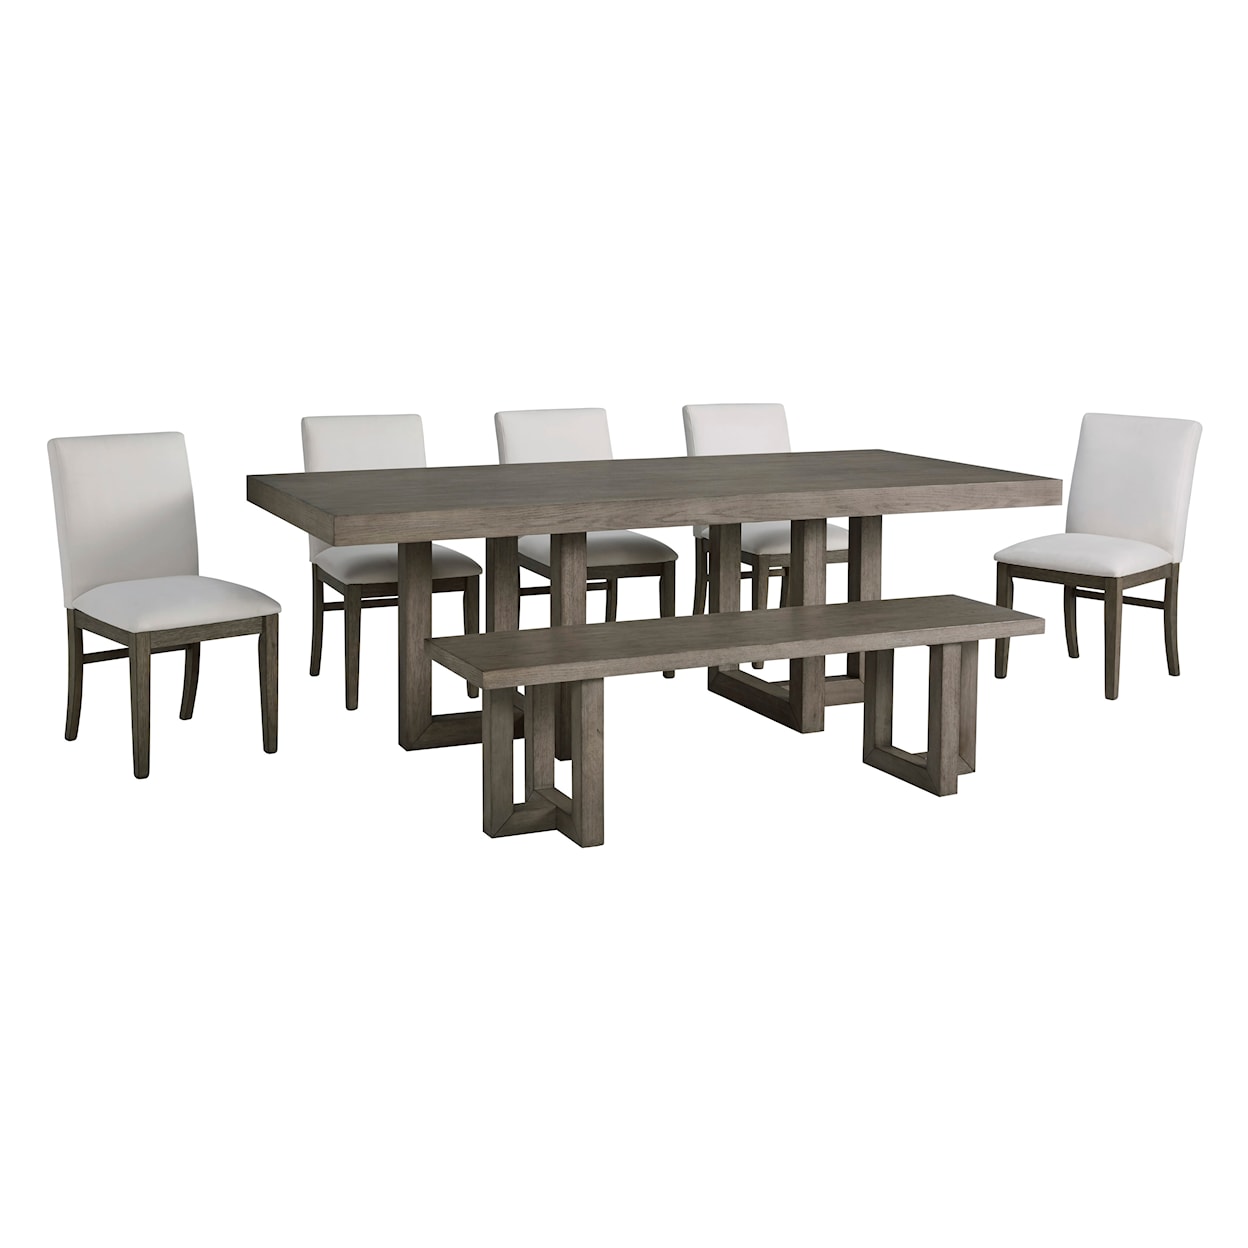 Benchcraft Anibecca 7-Piece Dining Set with Bench